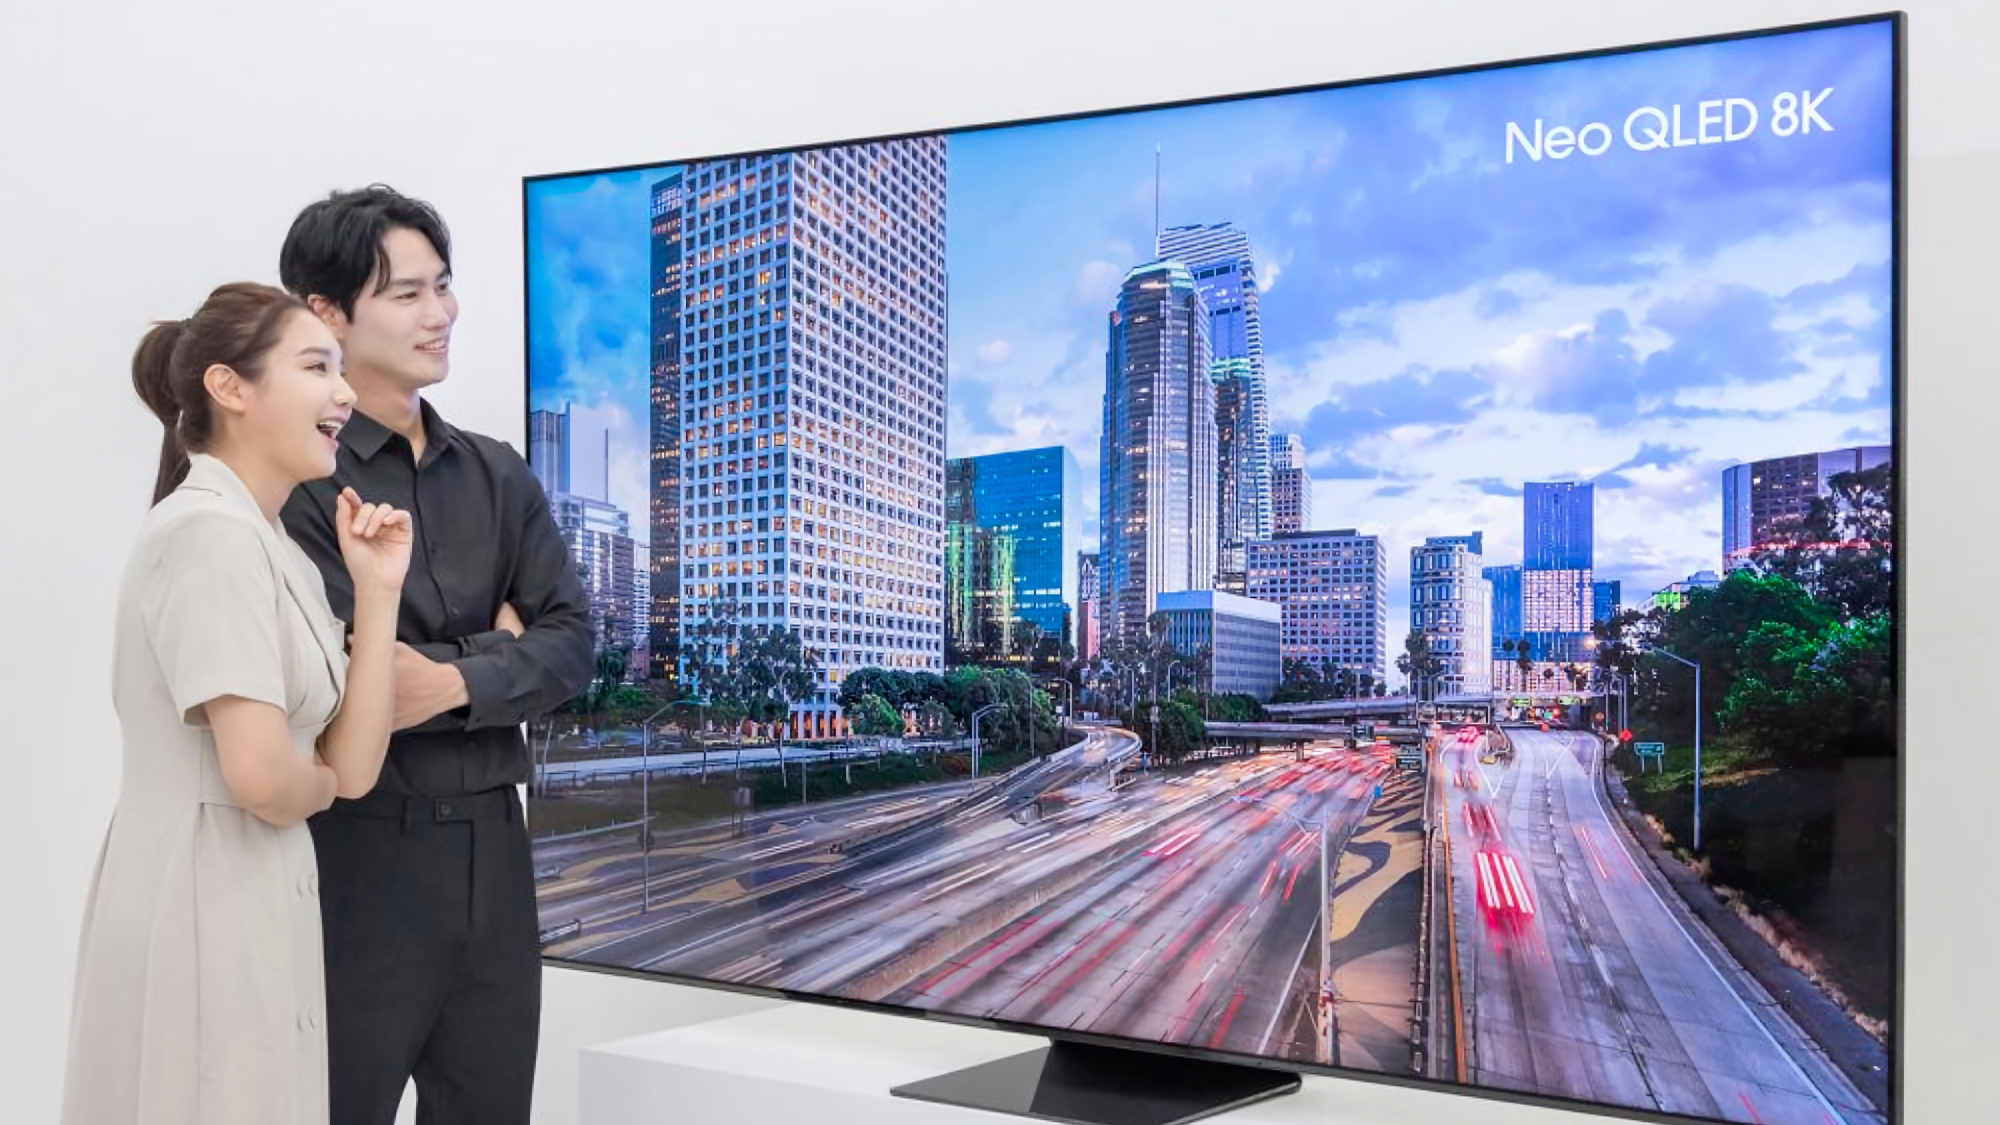 Samsung has unveiled a 98-inch 8K Neo QLED TV with 120W speakers for $39,000